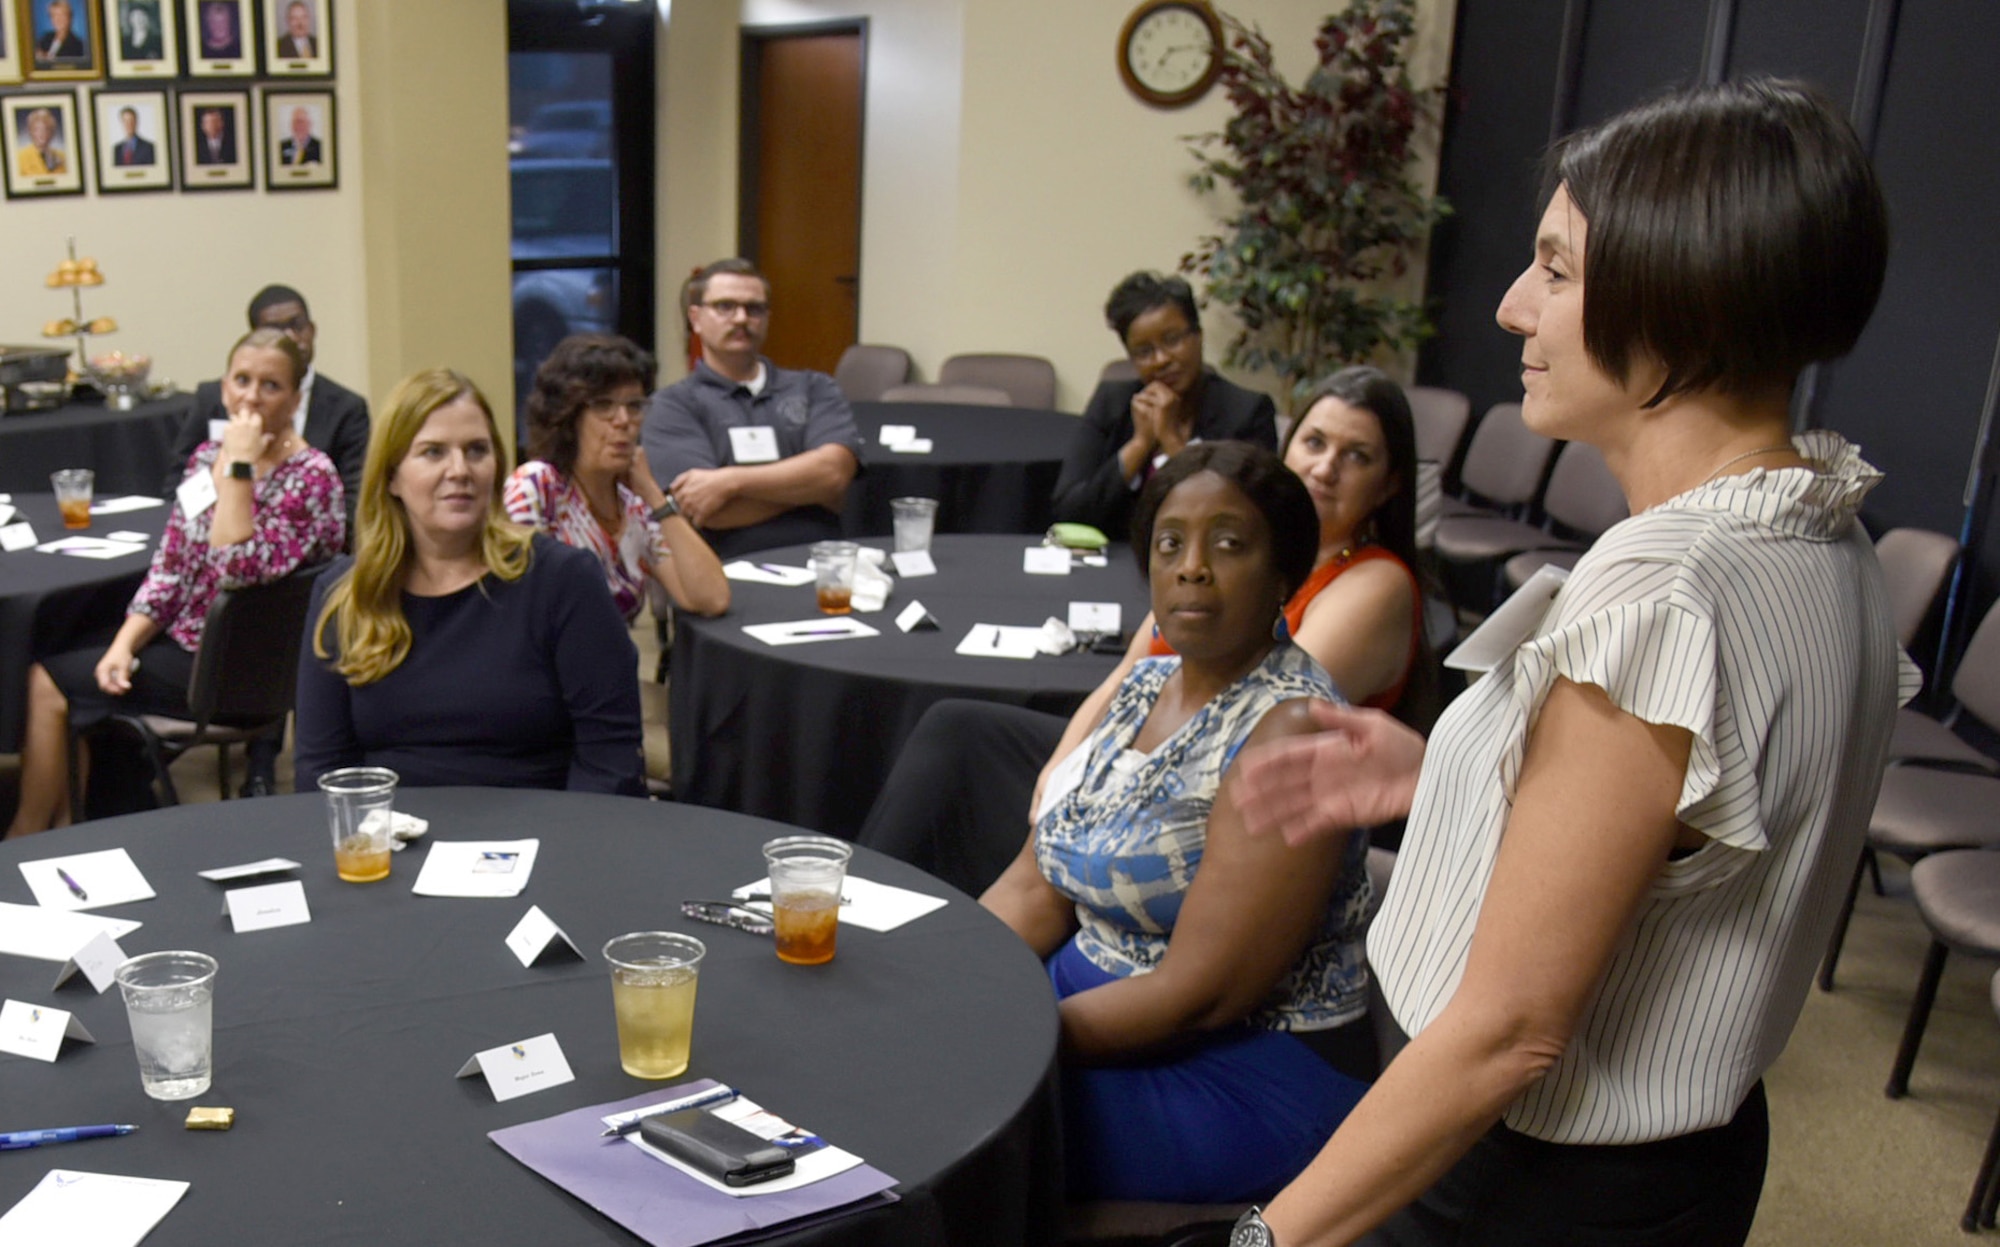 Maj. Denise Zona, 72nd Medical Group Mental Health Flight commander, talks about the importance of forming and maintaining relationships during a community dinner Sept. 4, 2019, at the Midwest City Chamber of Commerce. During the dinner, members of Team Tinker and representatives from community organizations shared ideas and experiences about suicide prevention.